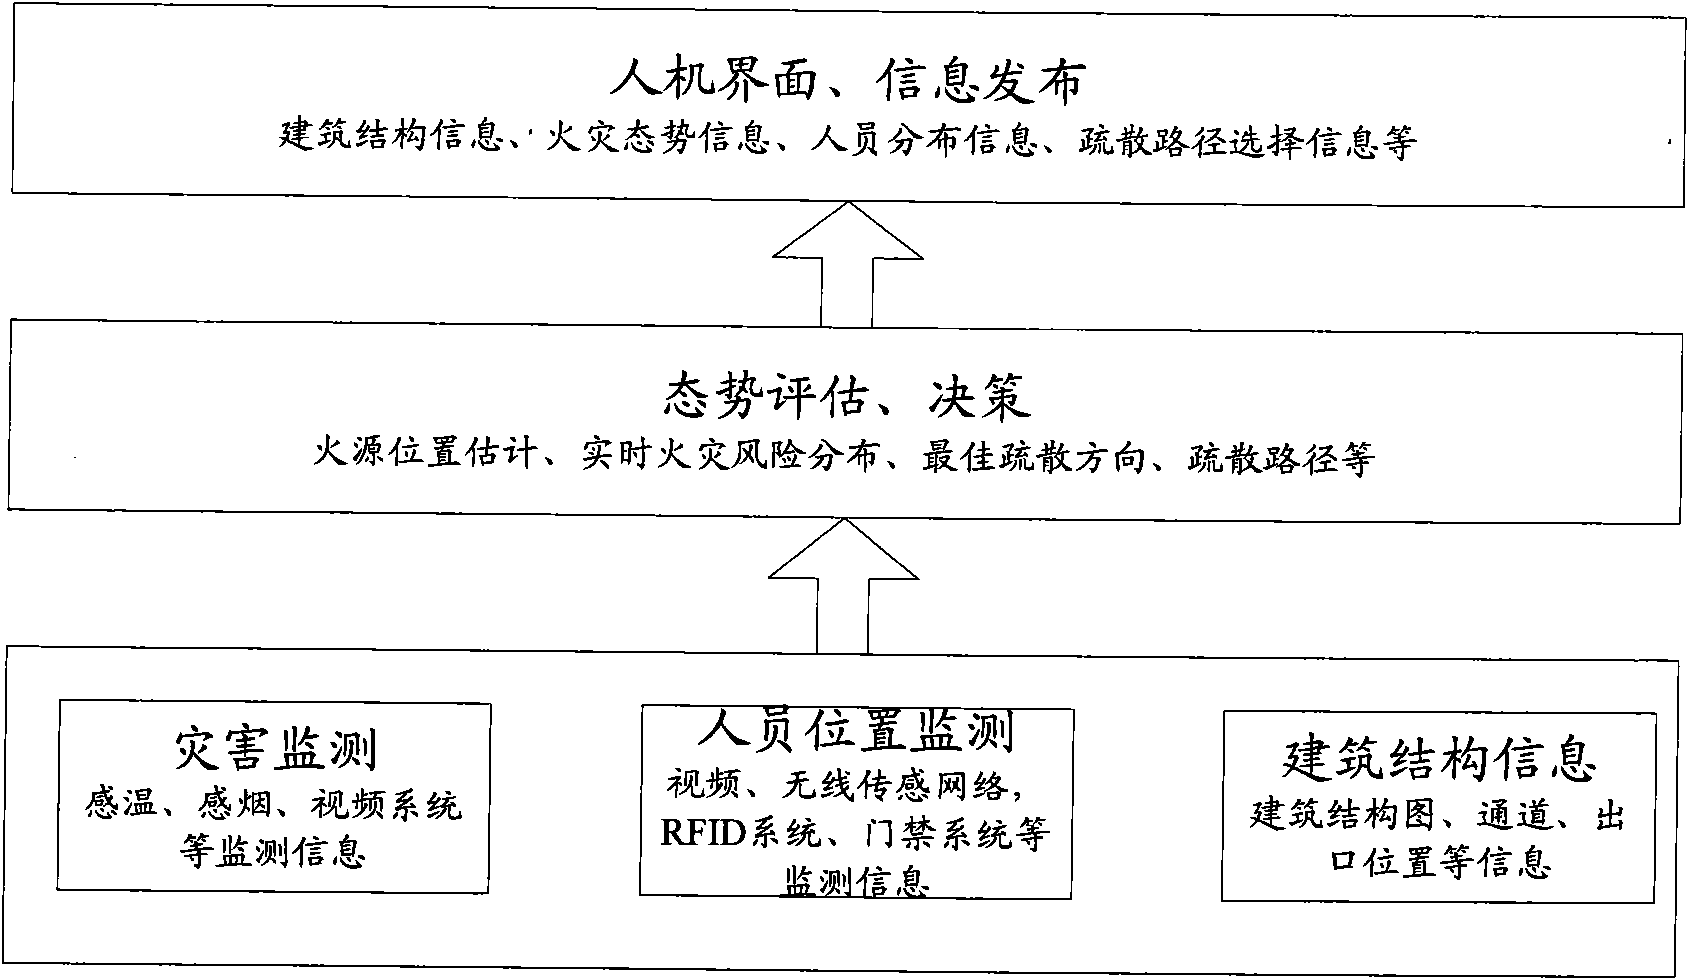 Method and system for evaluating building fire situation and instructing evacuation